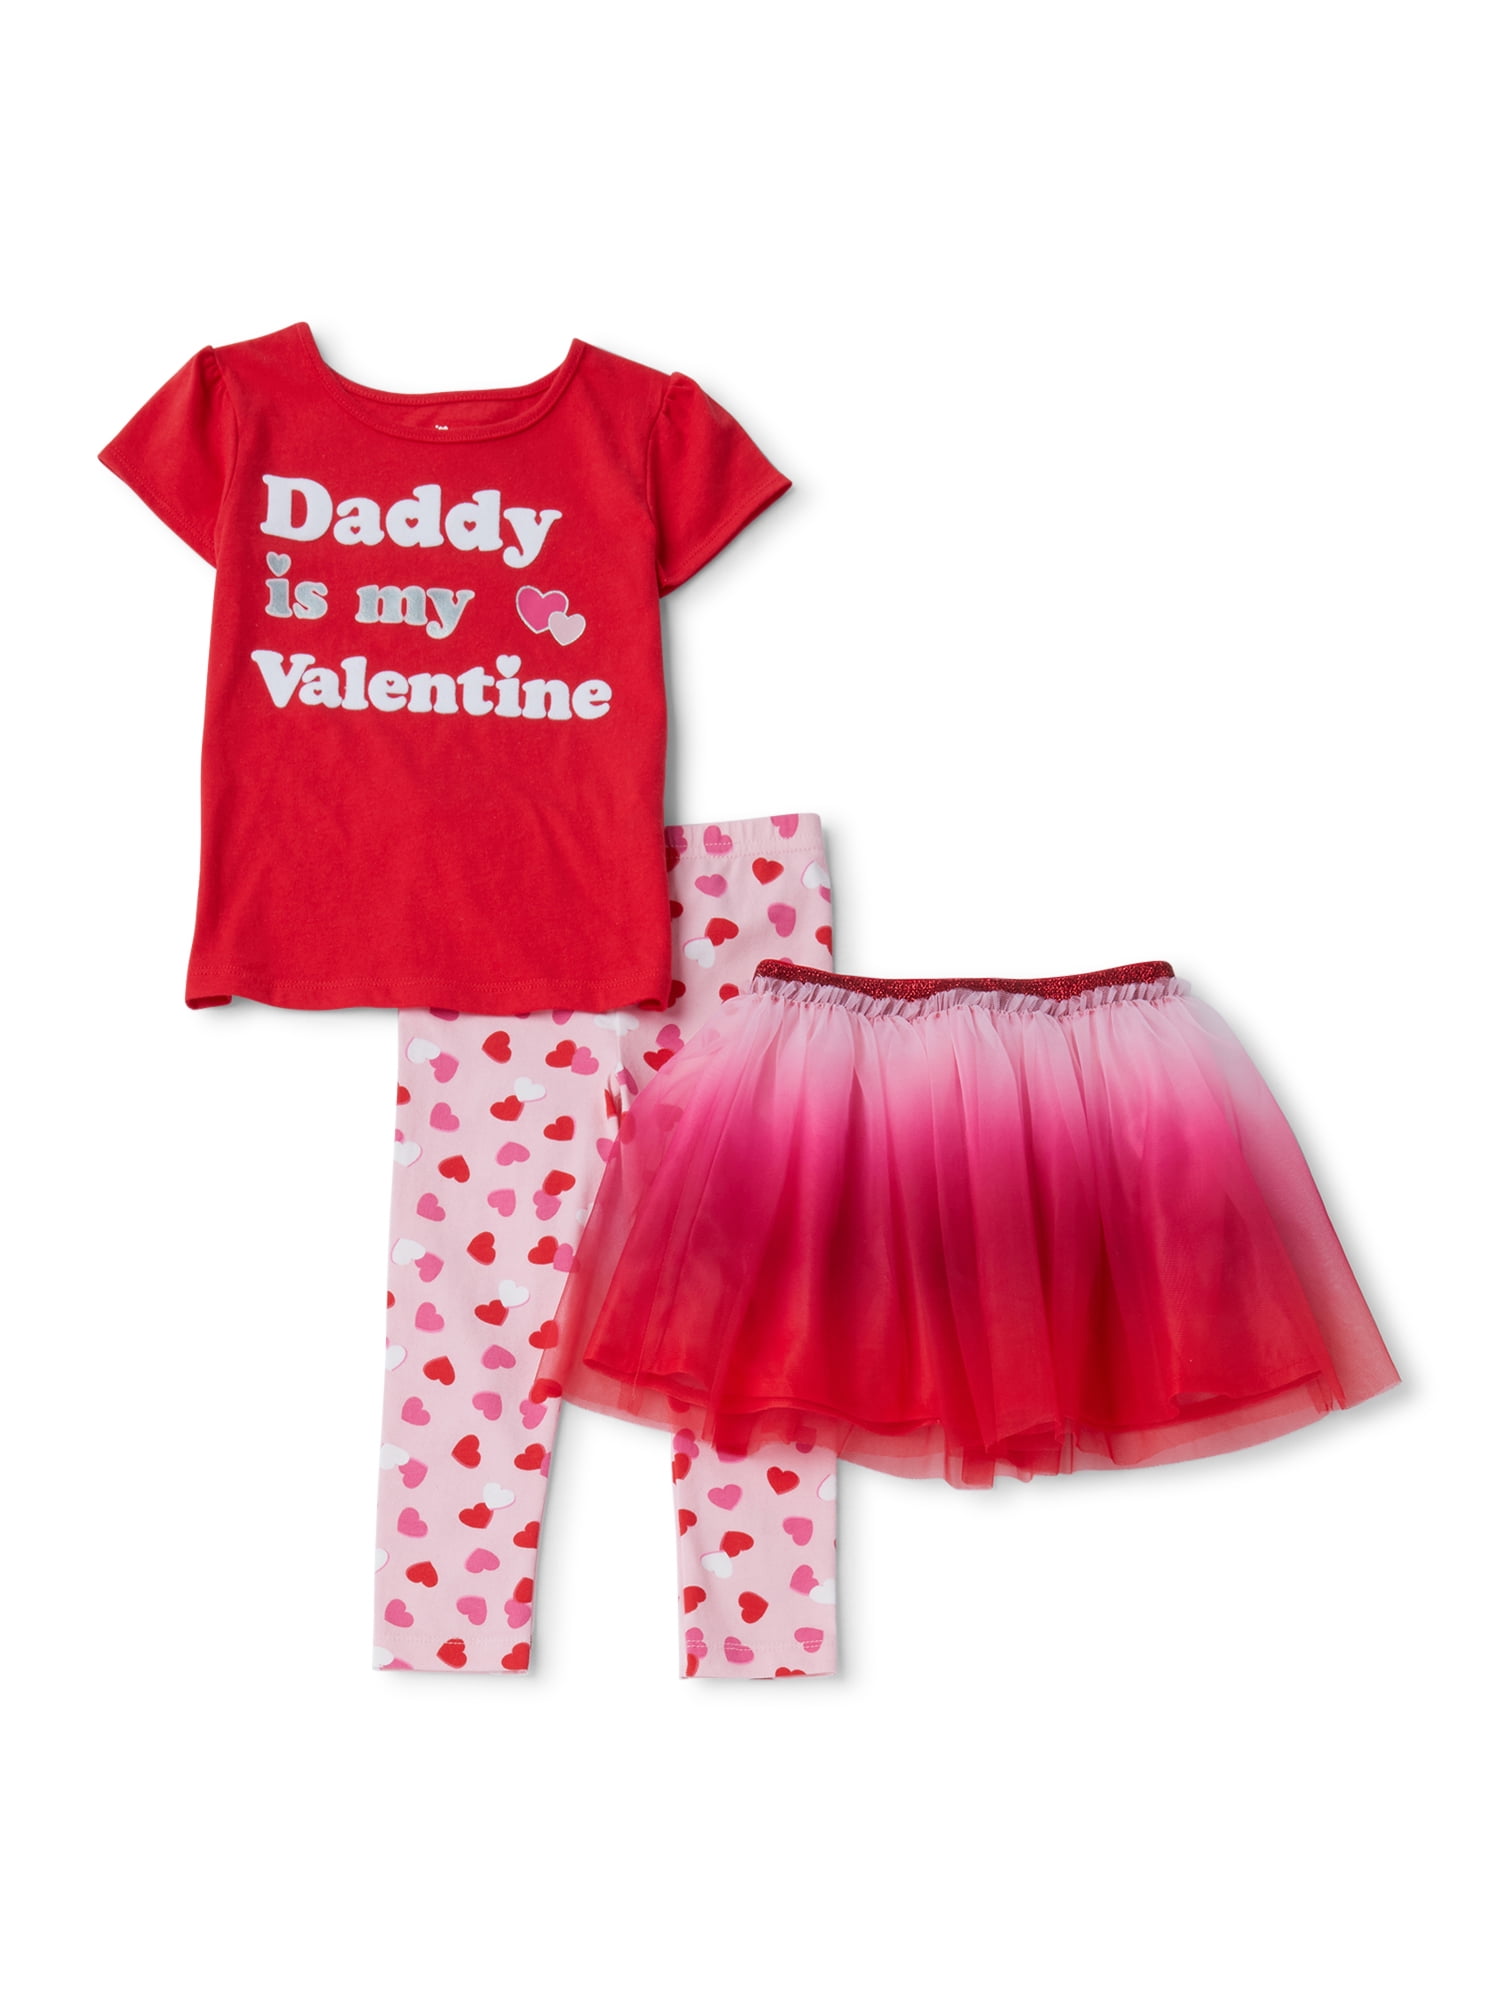 YOUNGER TREE Newborn Baby Girls Valentine/’s Day Outfit Long Sleeve Romper Tutu Skirt Headband Leg Warmer 4PCS Outfits